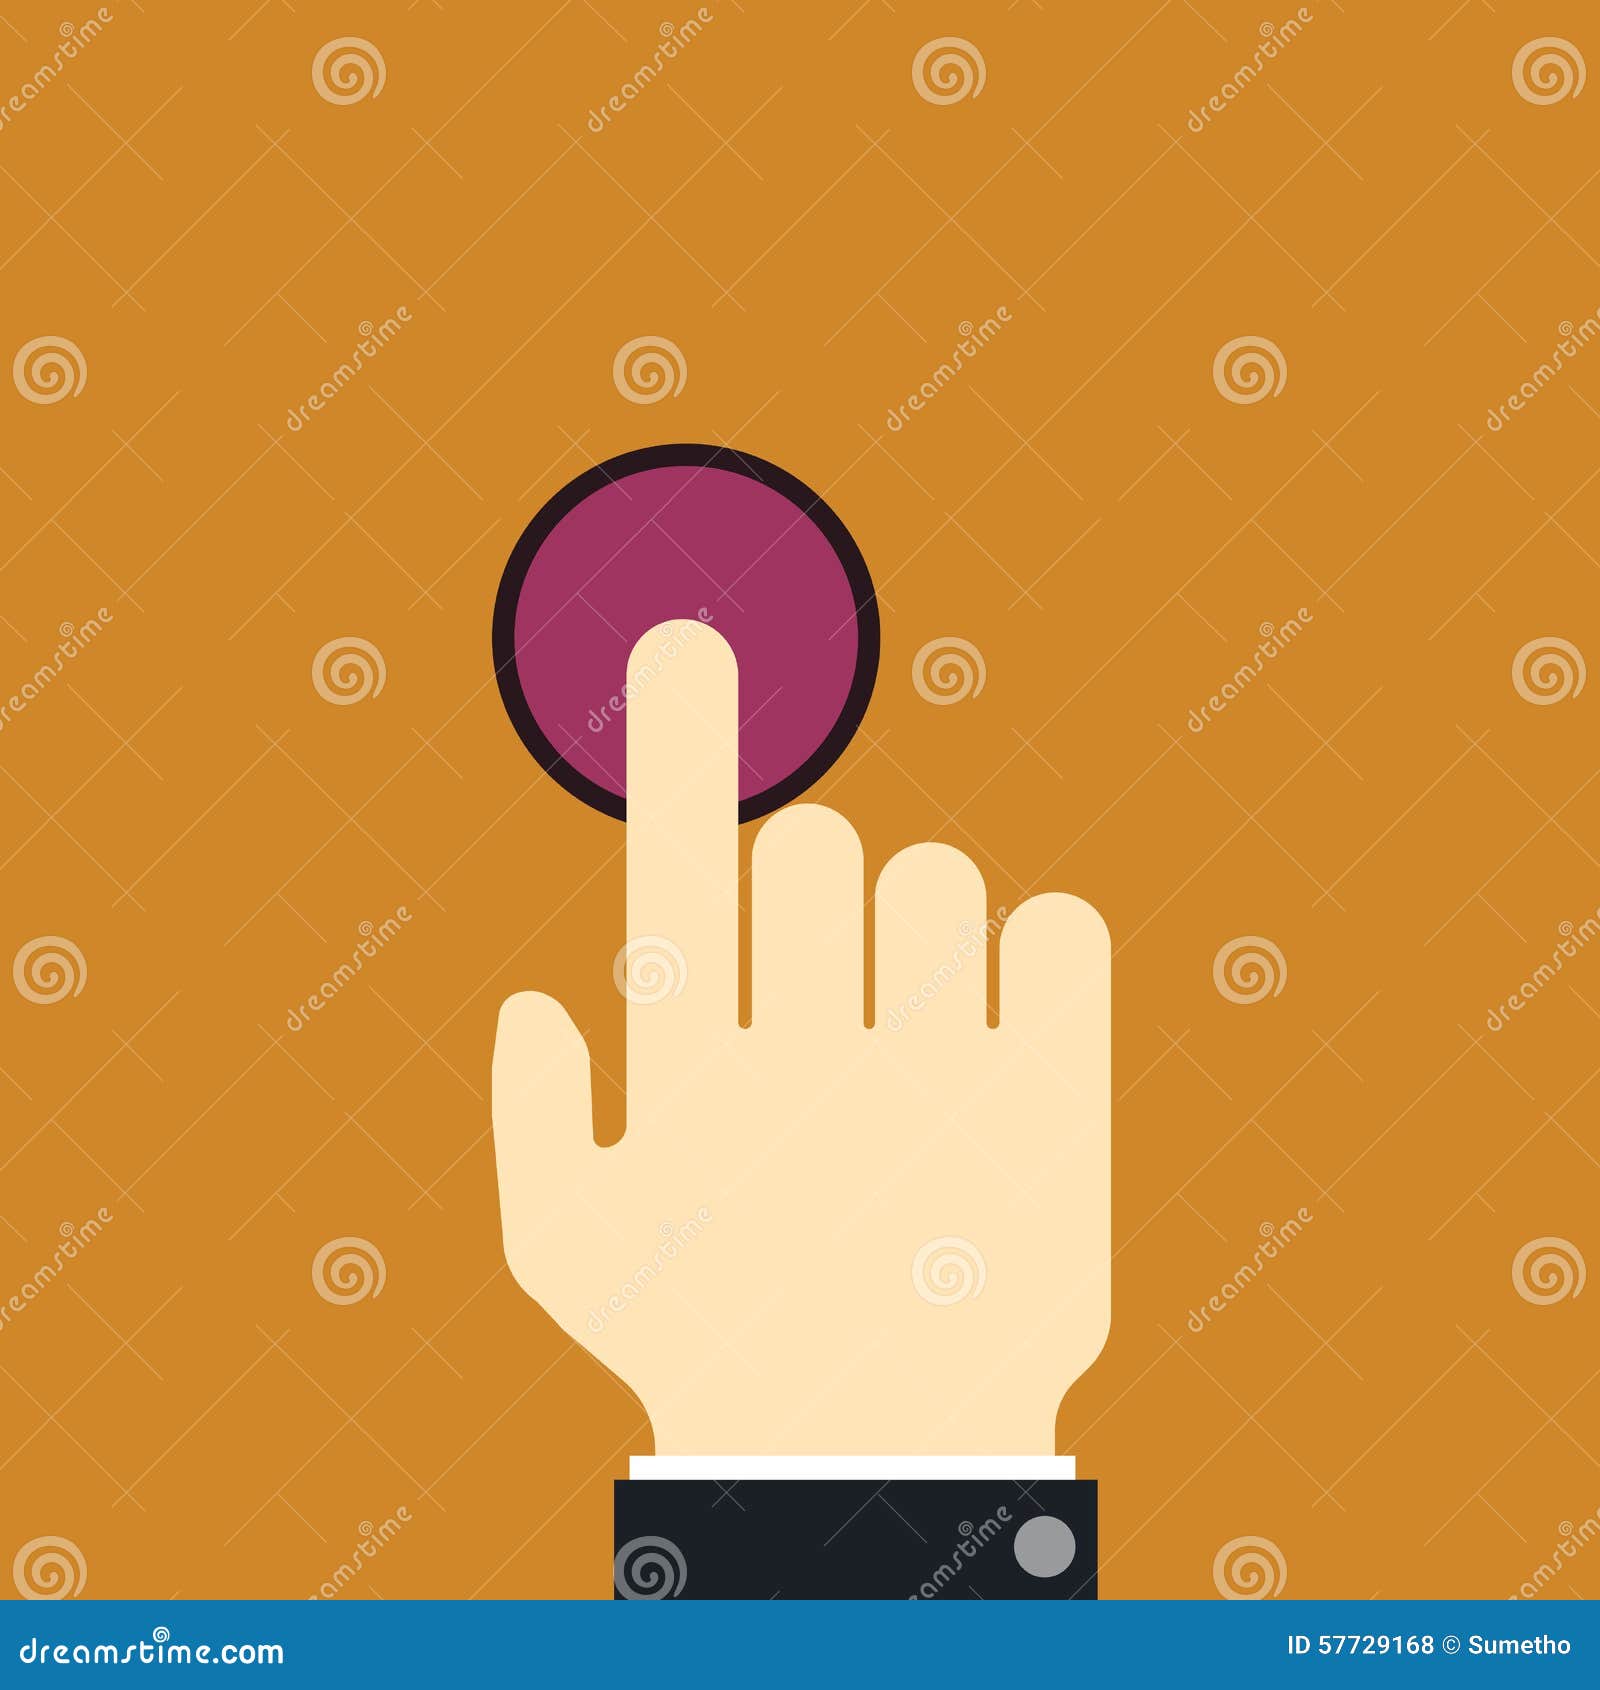 Free Vectors  Finger (where switch button is pressed) OFF